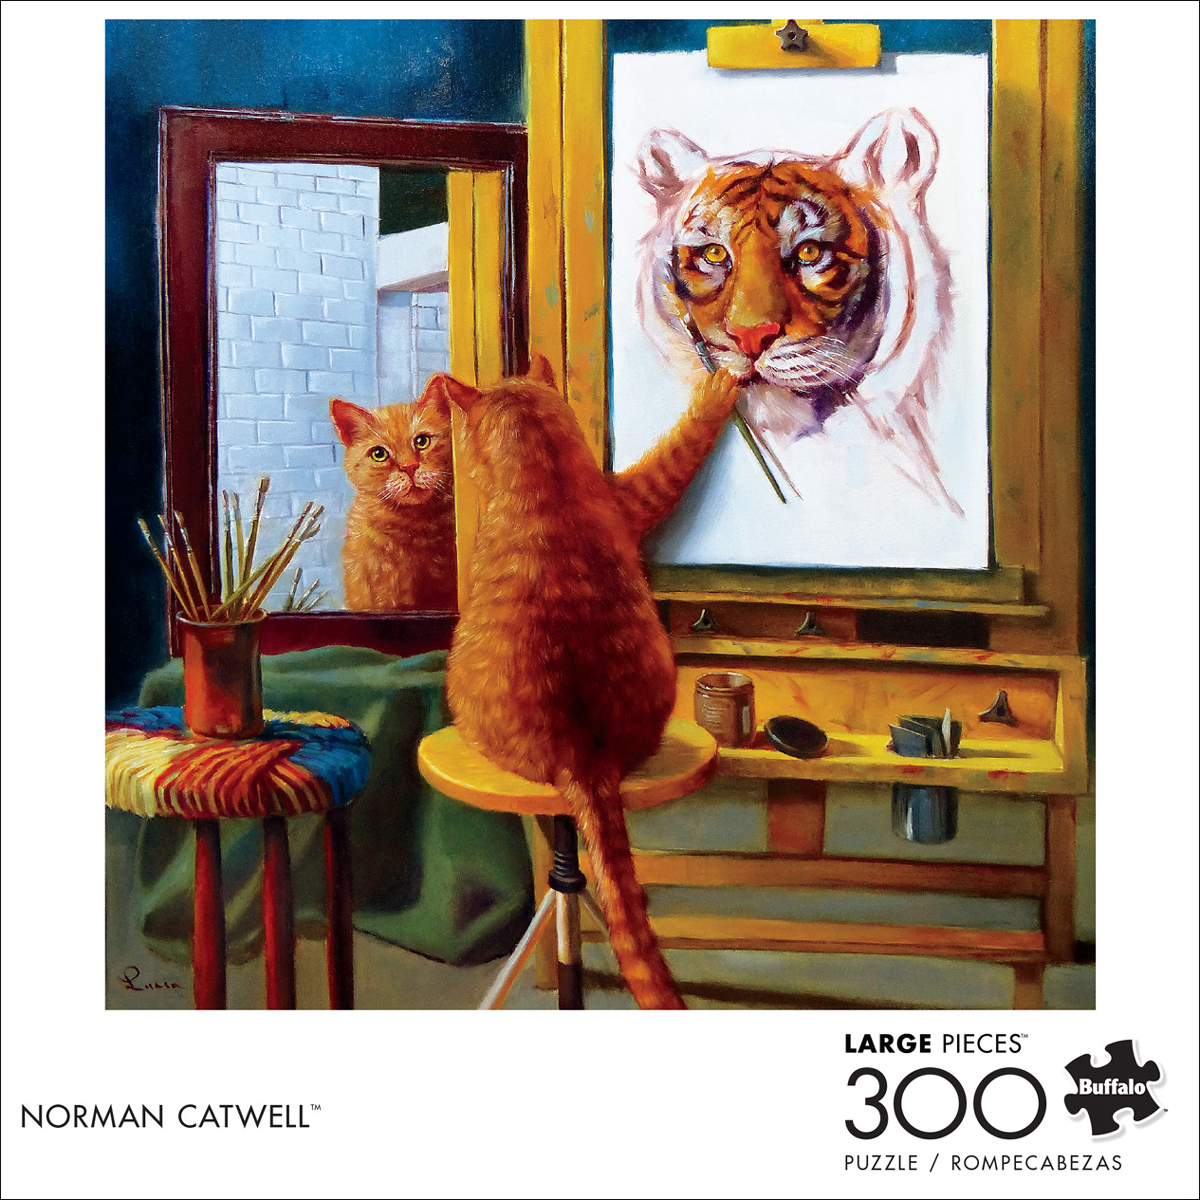 Norman Catwell